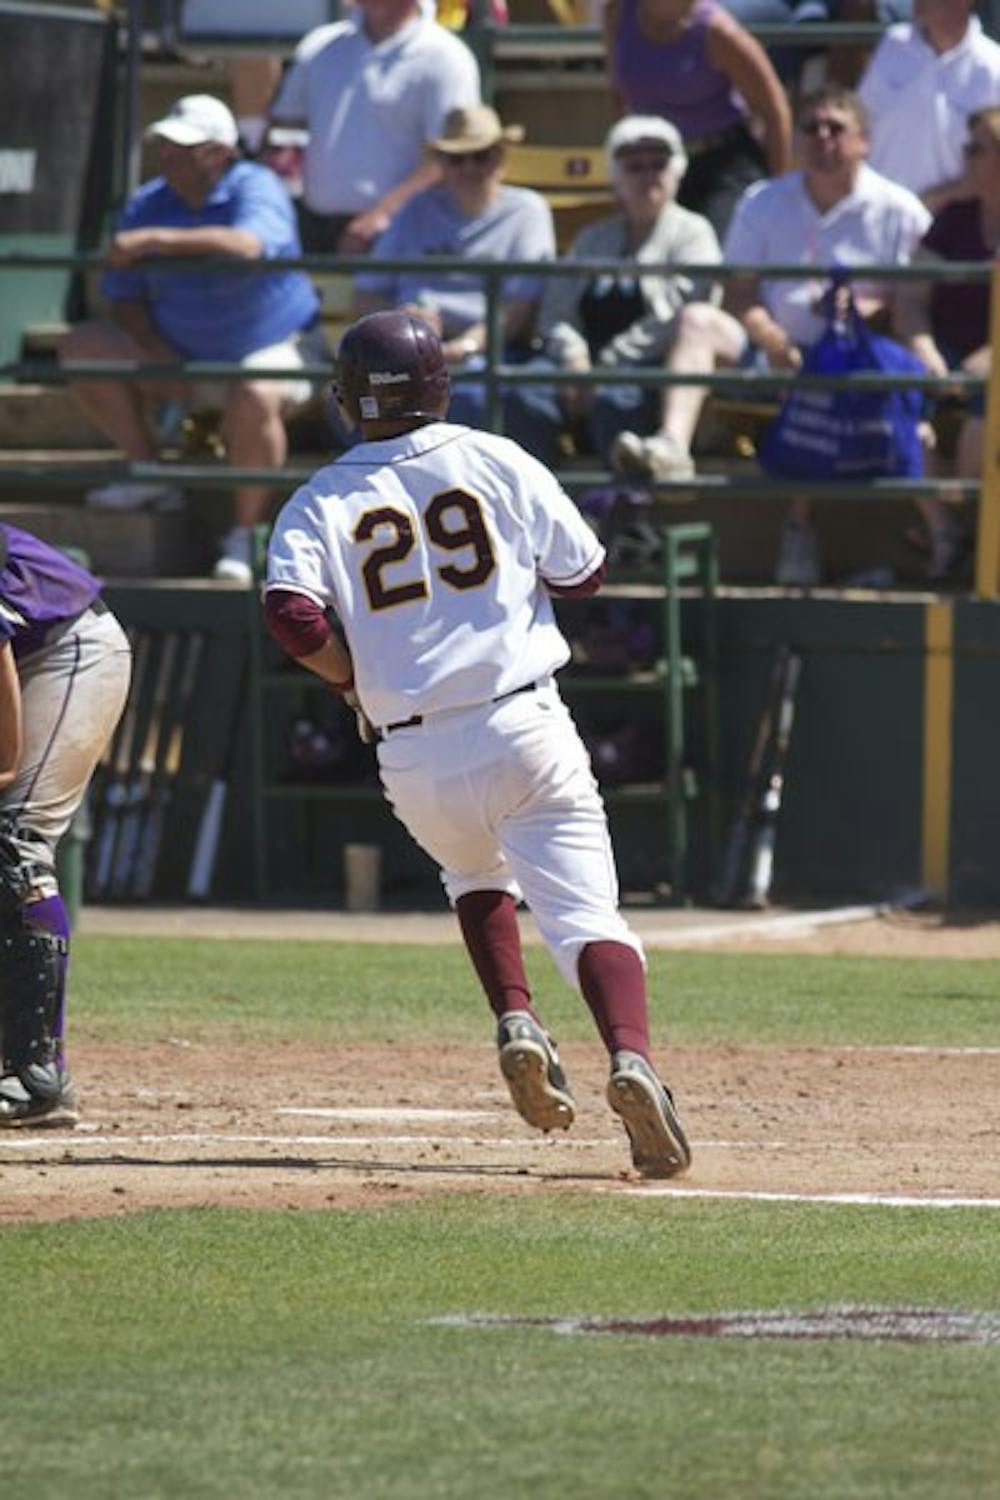 BRING IT HOME: ASU senior third baseman Raoul Torrez had one hit and scored one run during the Sun Devils’ 11-5 win over San Francisco on Tuesday night at Packard Stadium. (Photo by Scott Stuk)